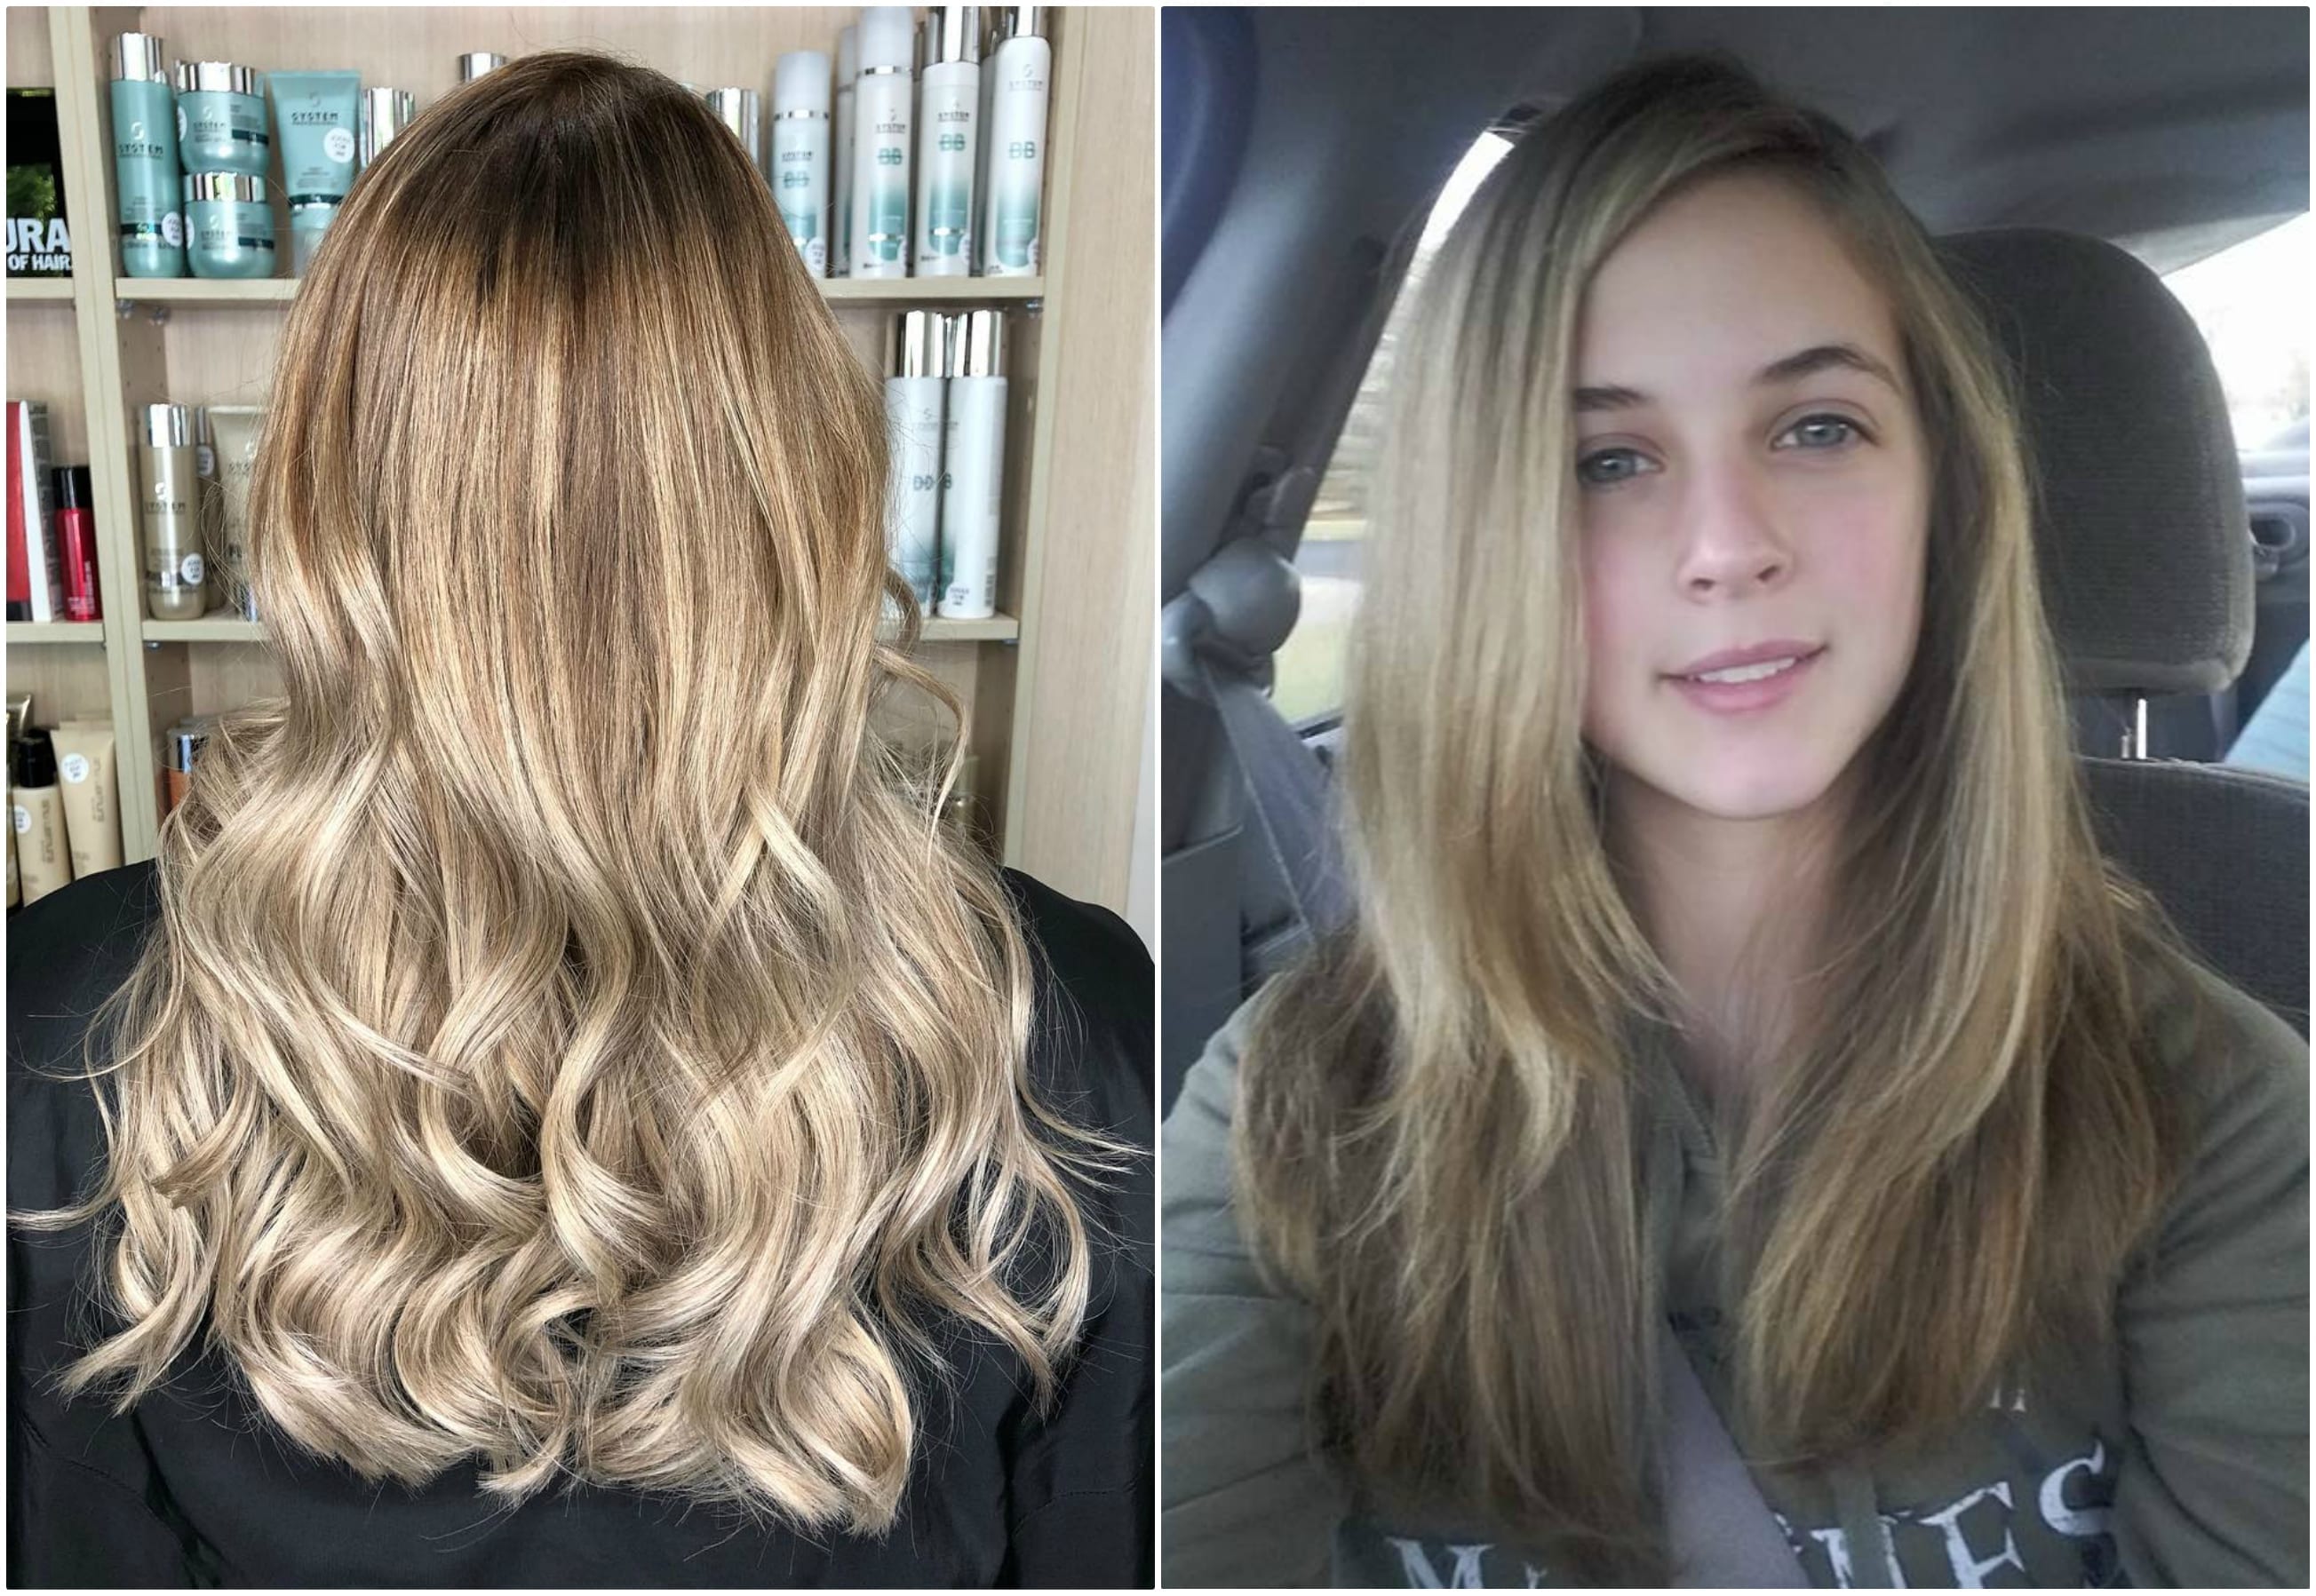 But this year, she was extra excited because her mom had decided to treat her to highlights in her hair for the very first time! Afterward, she went on to see her dad as expected – but what wasn’t expected, was his reaction…